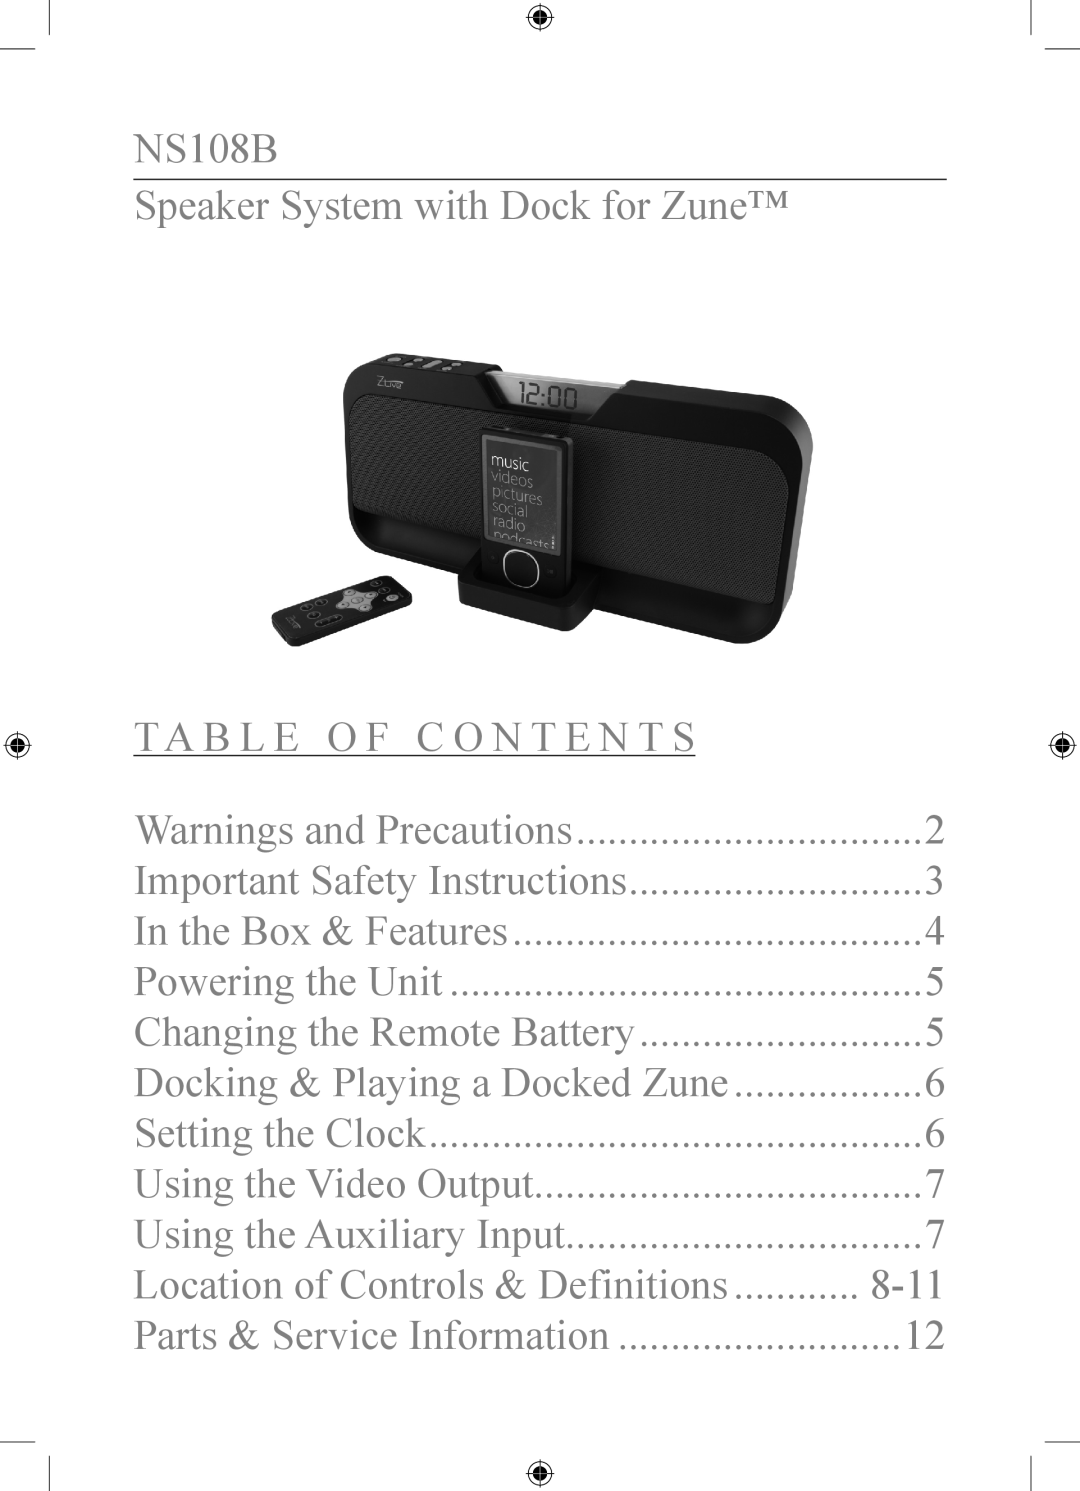 iLive important safety instructions NS108B Speaker System with Dock for Zune 